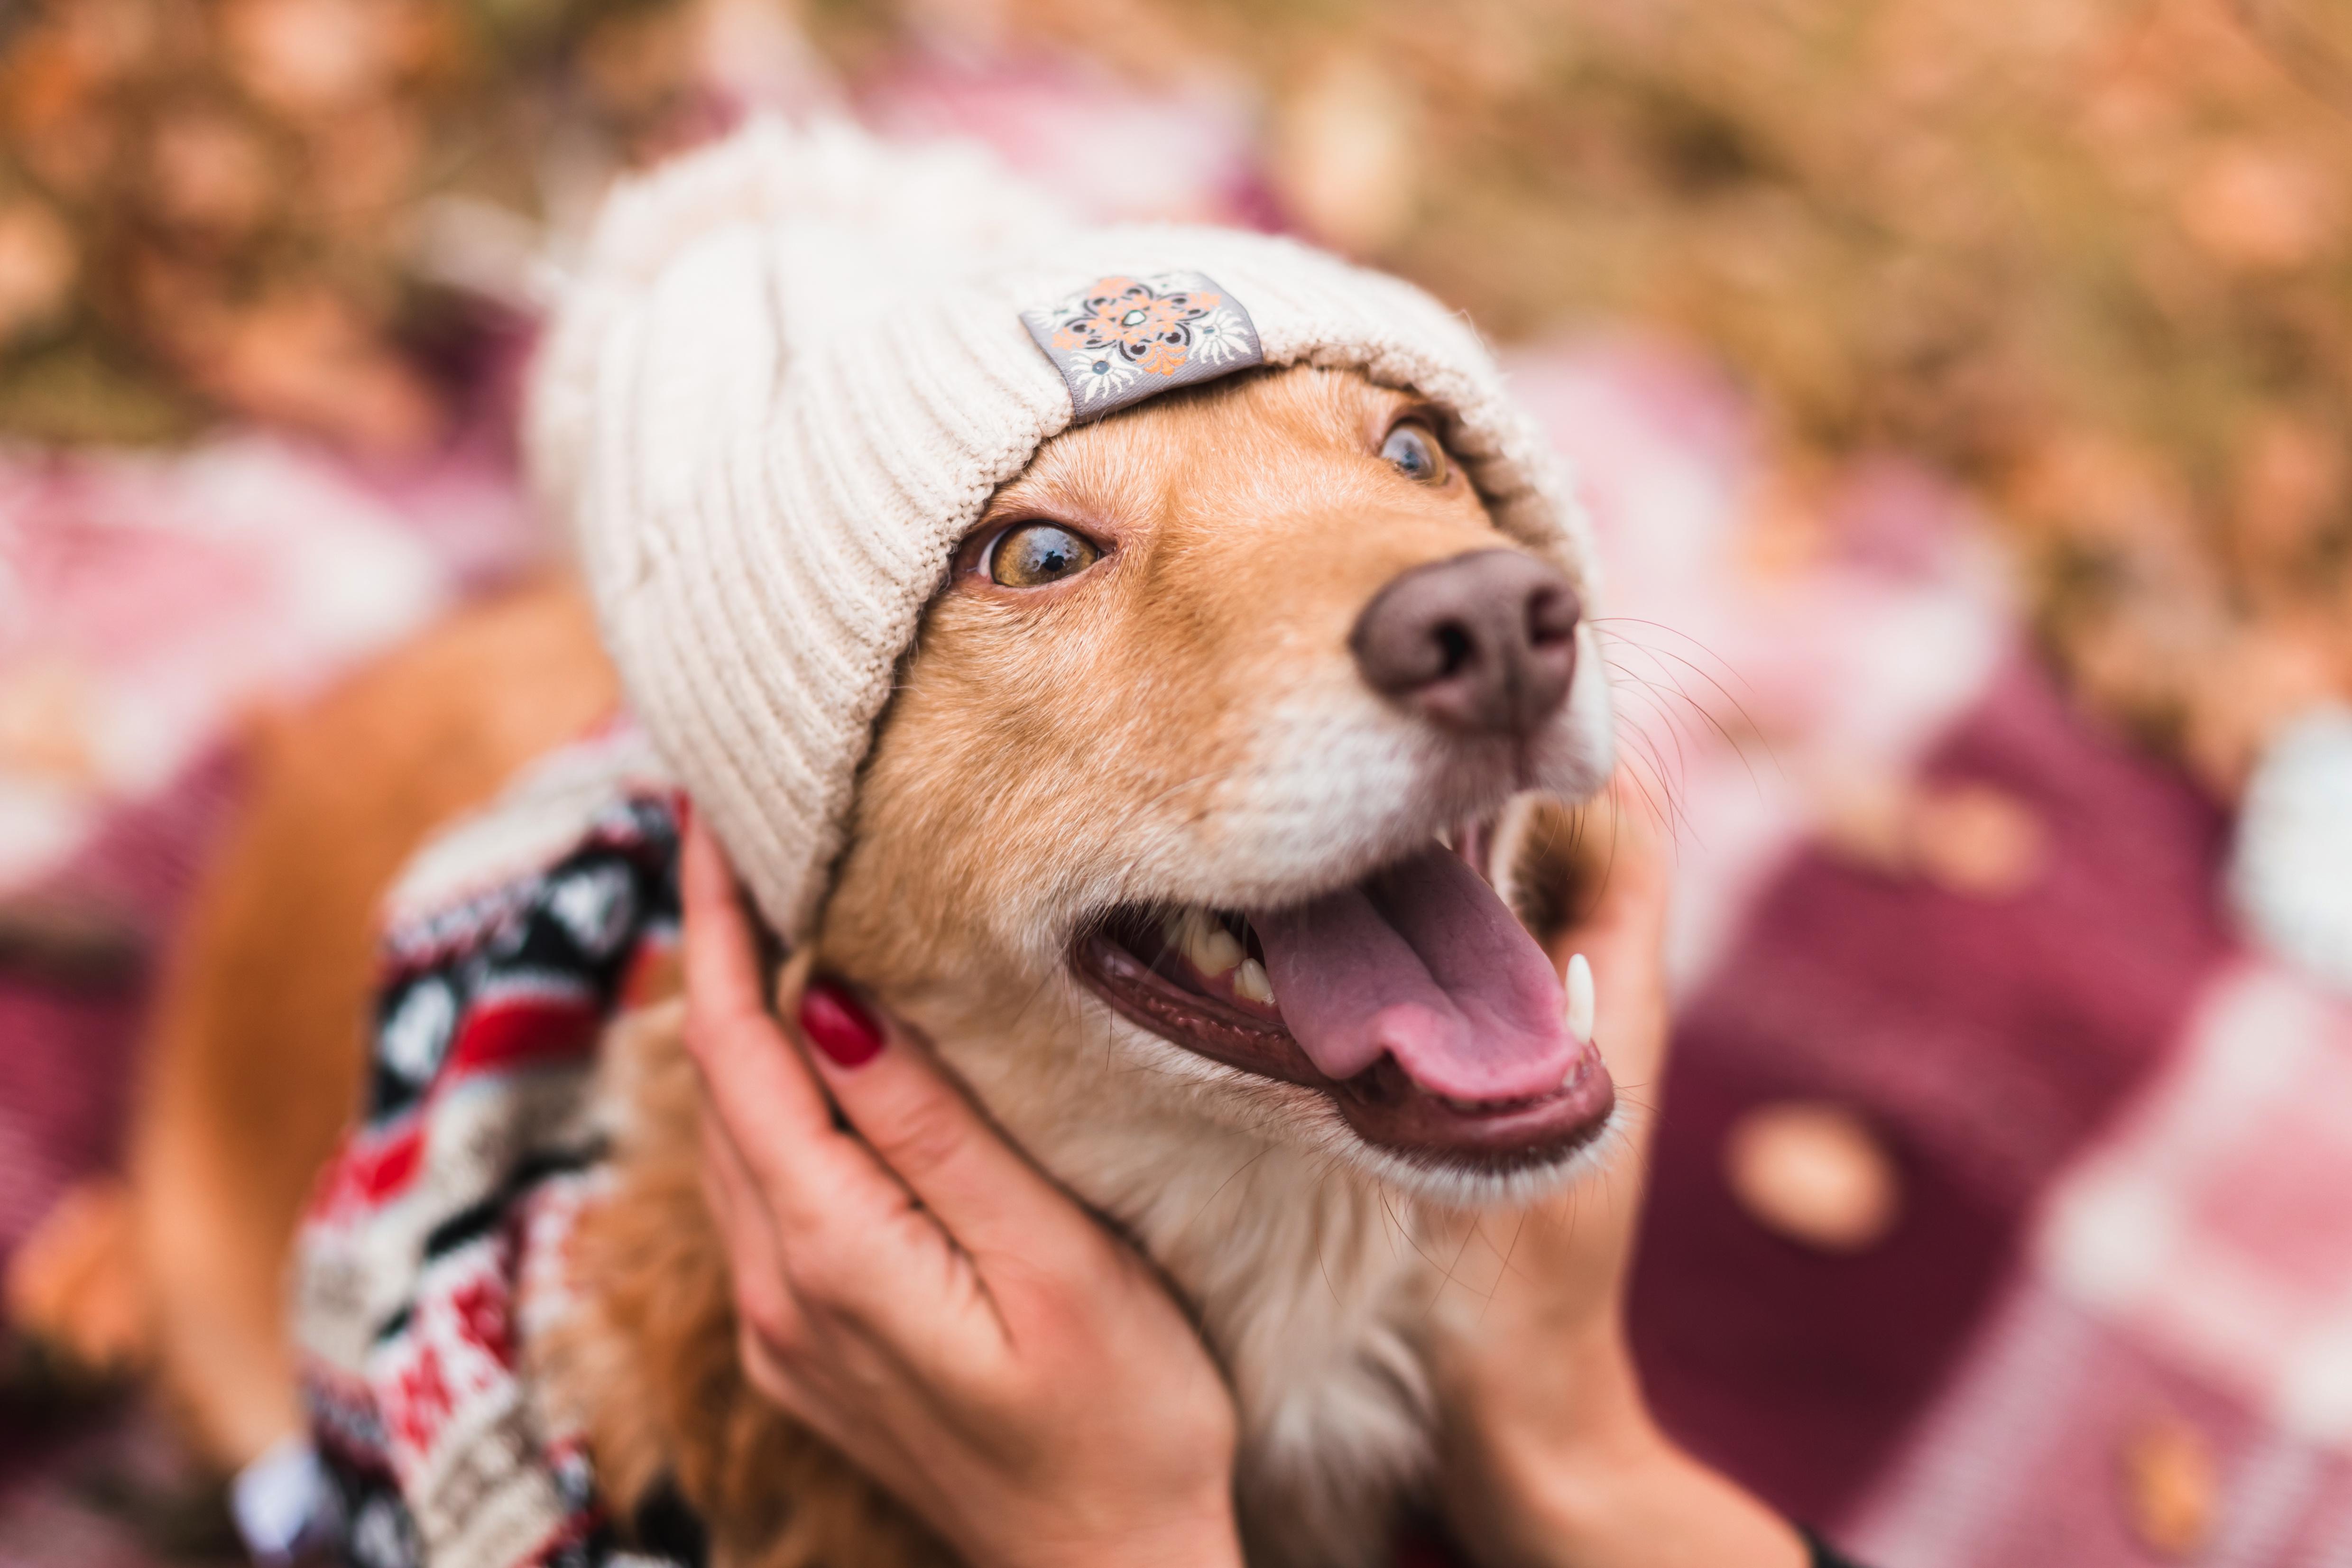 A happy dog wearing a scarf and knit hat getting pets